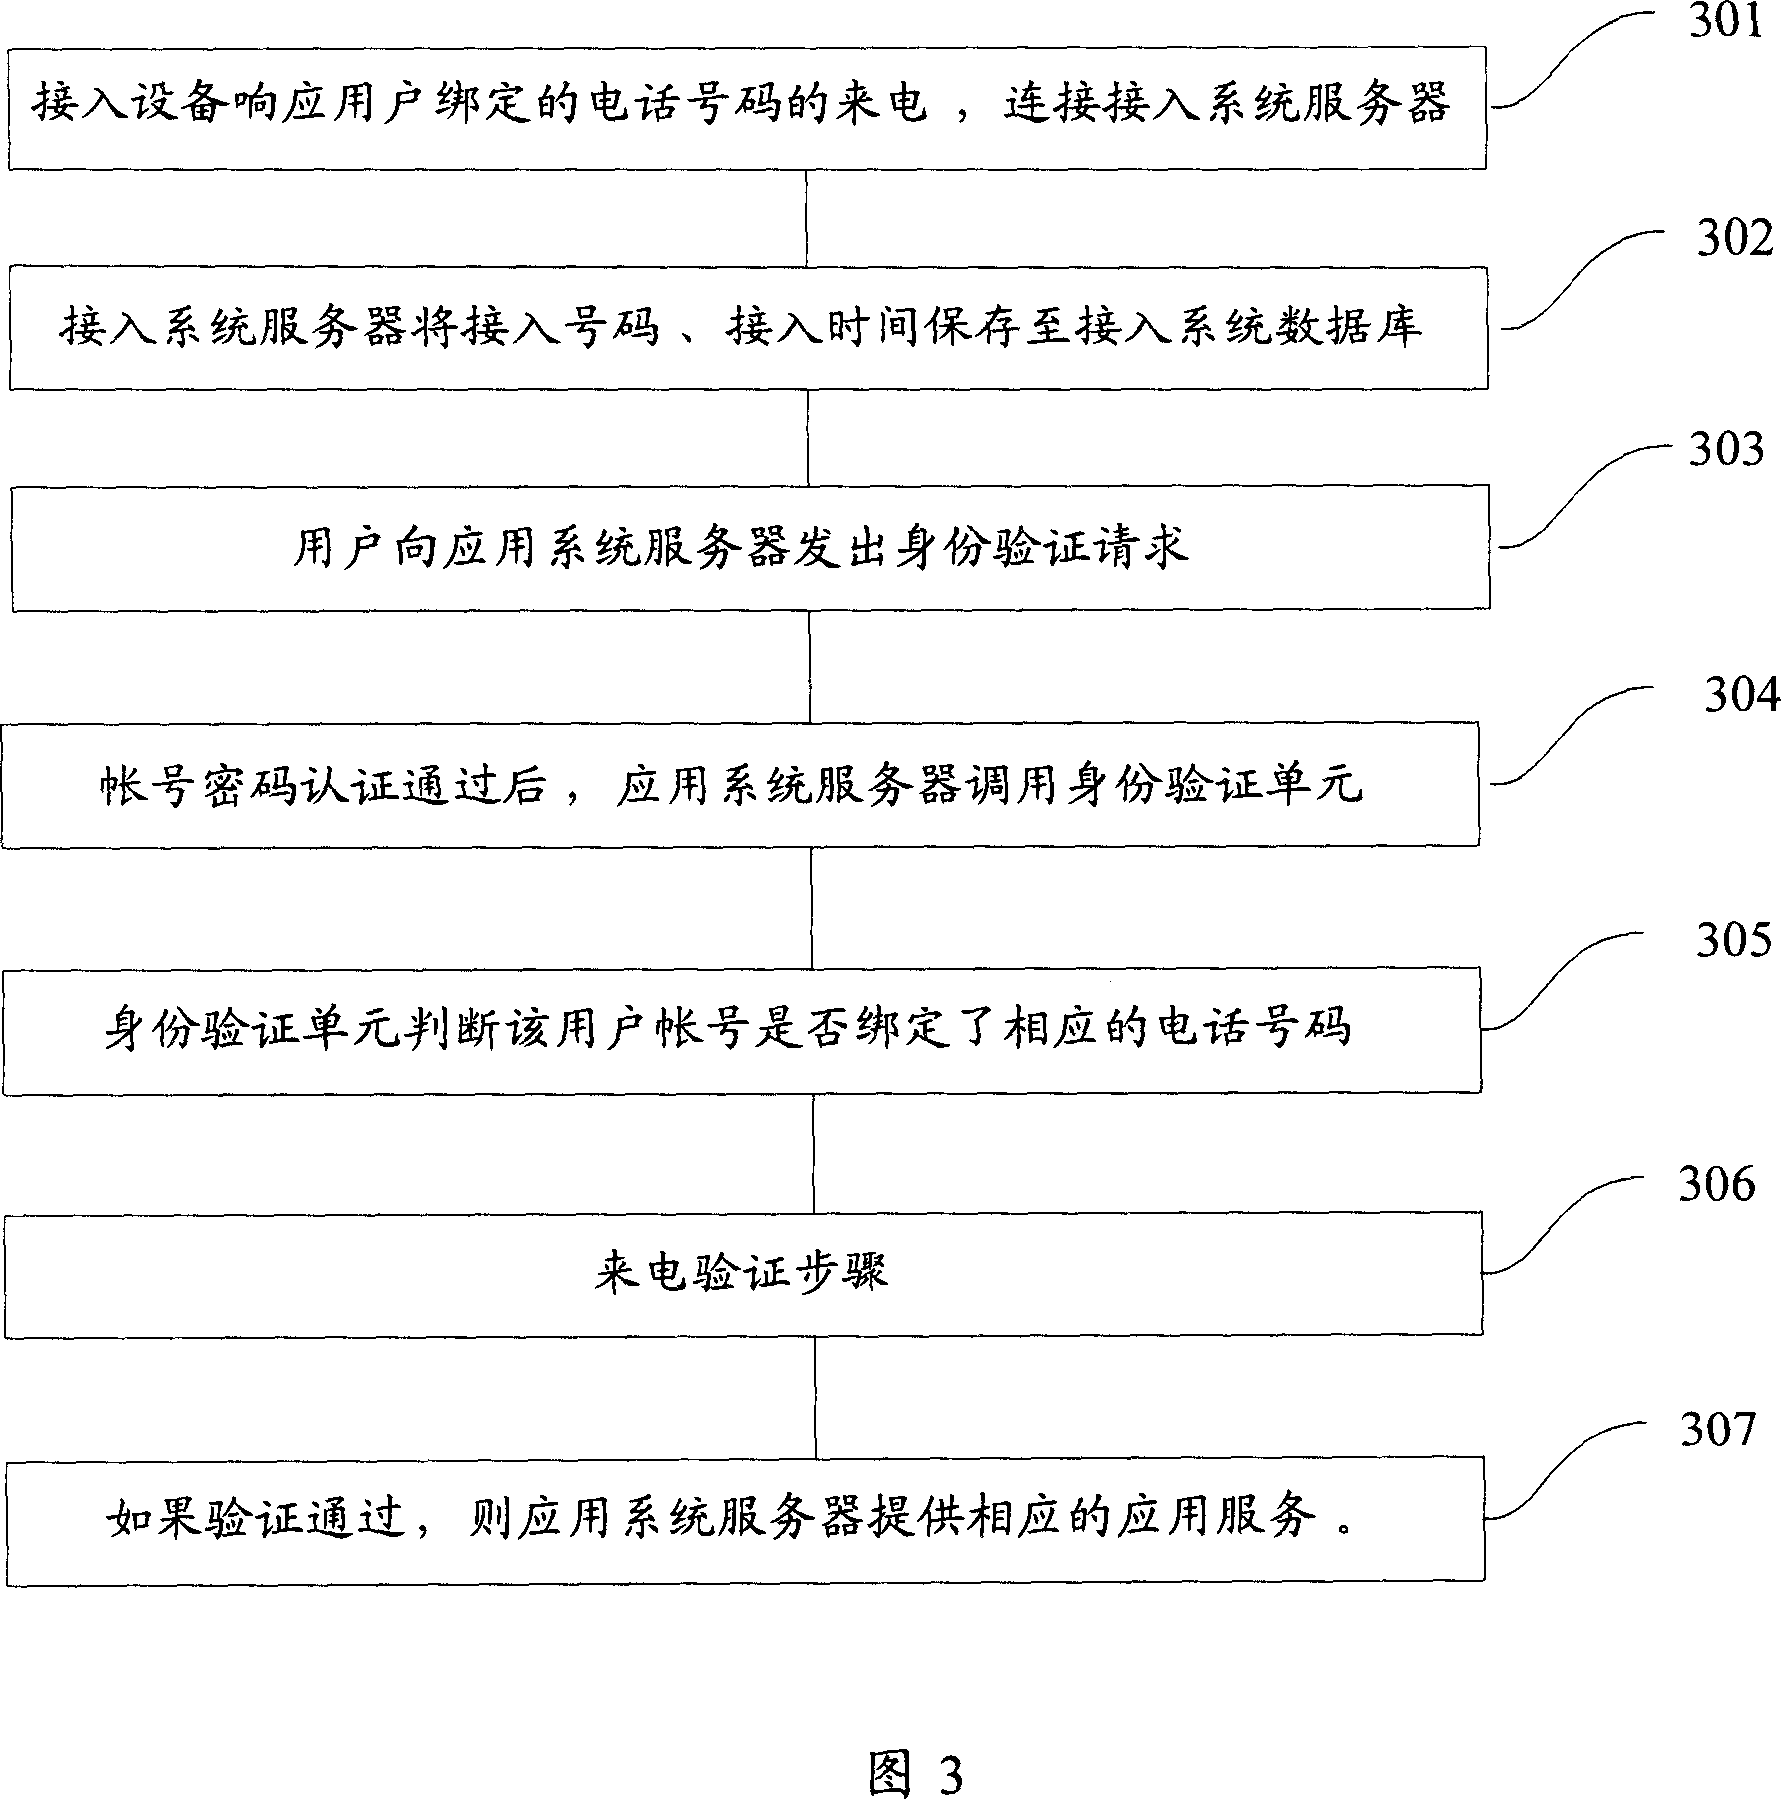 User identification identifying method and system